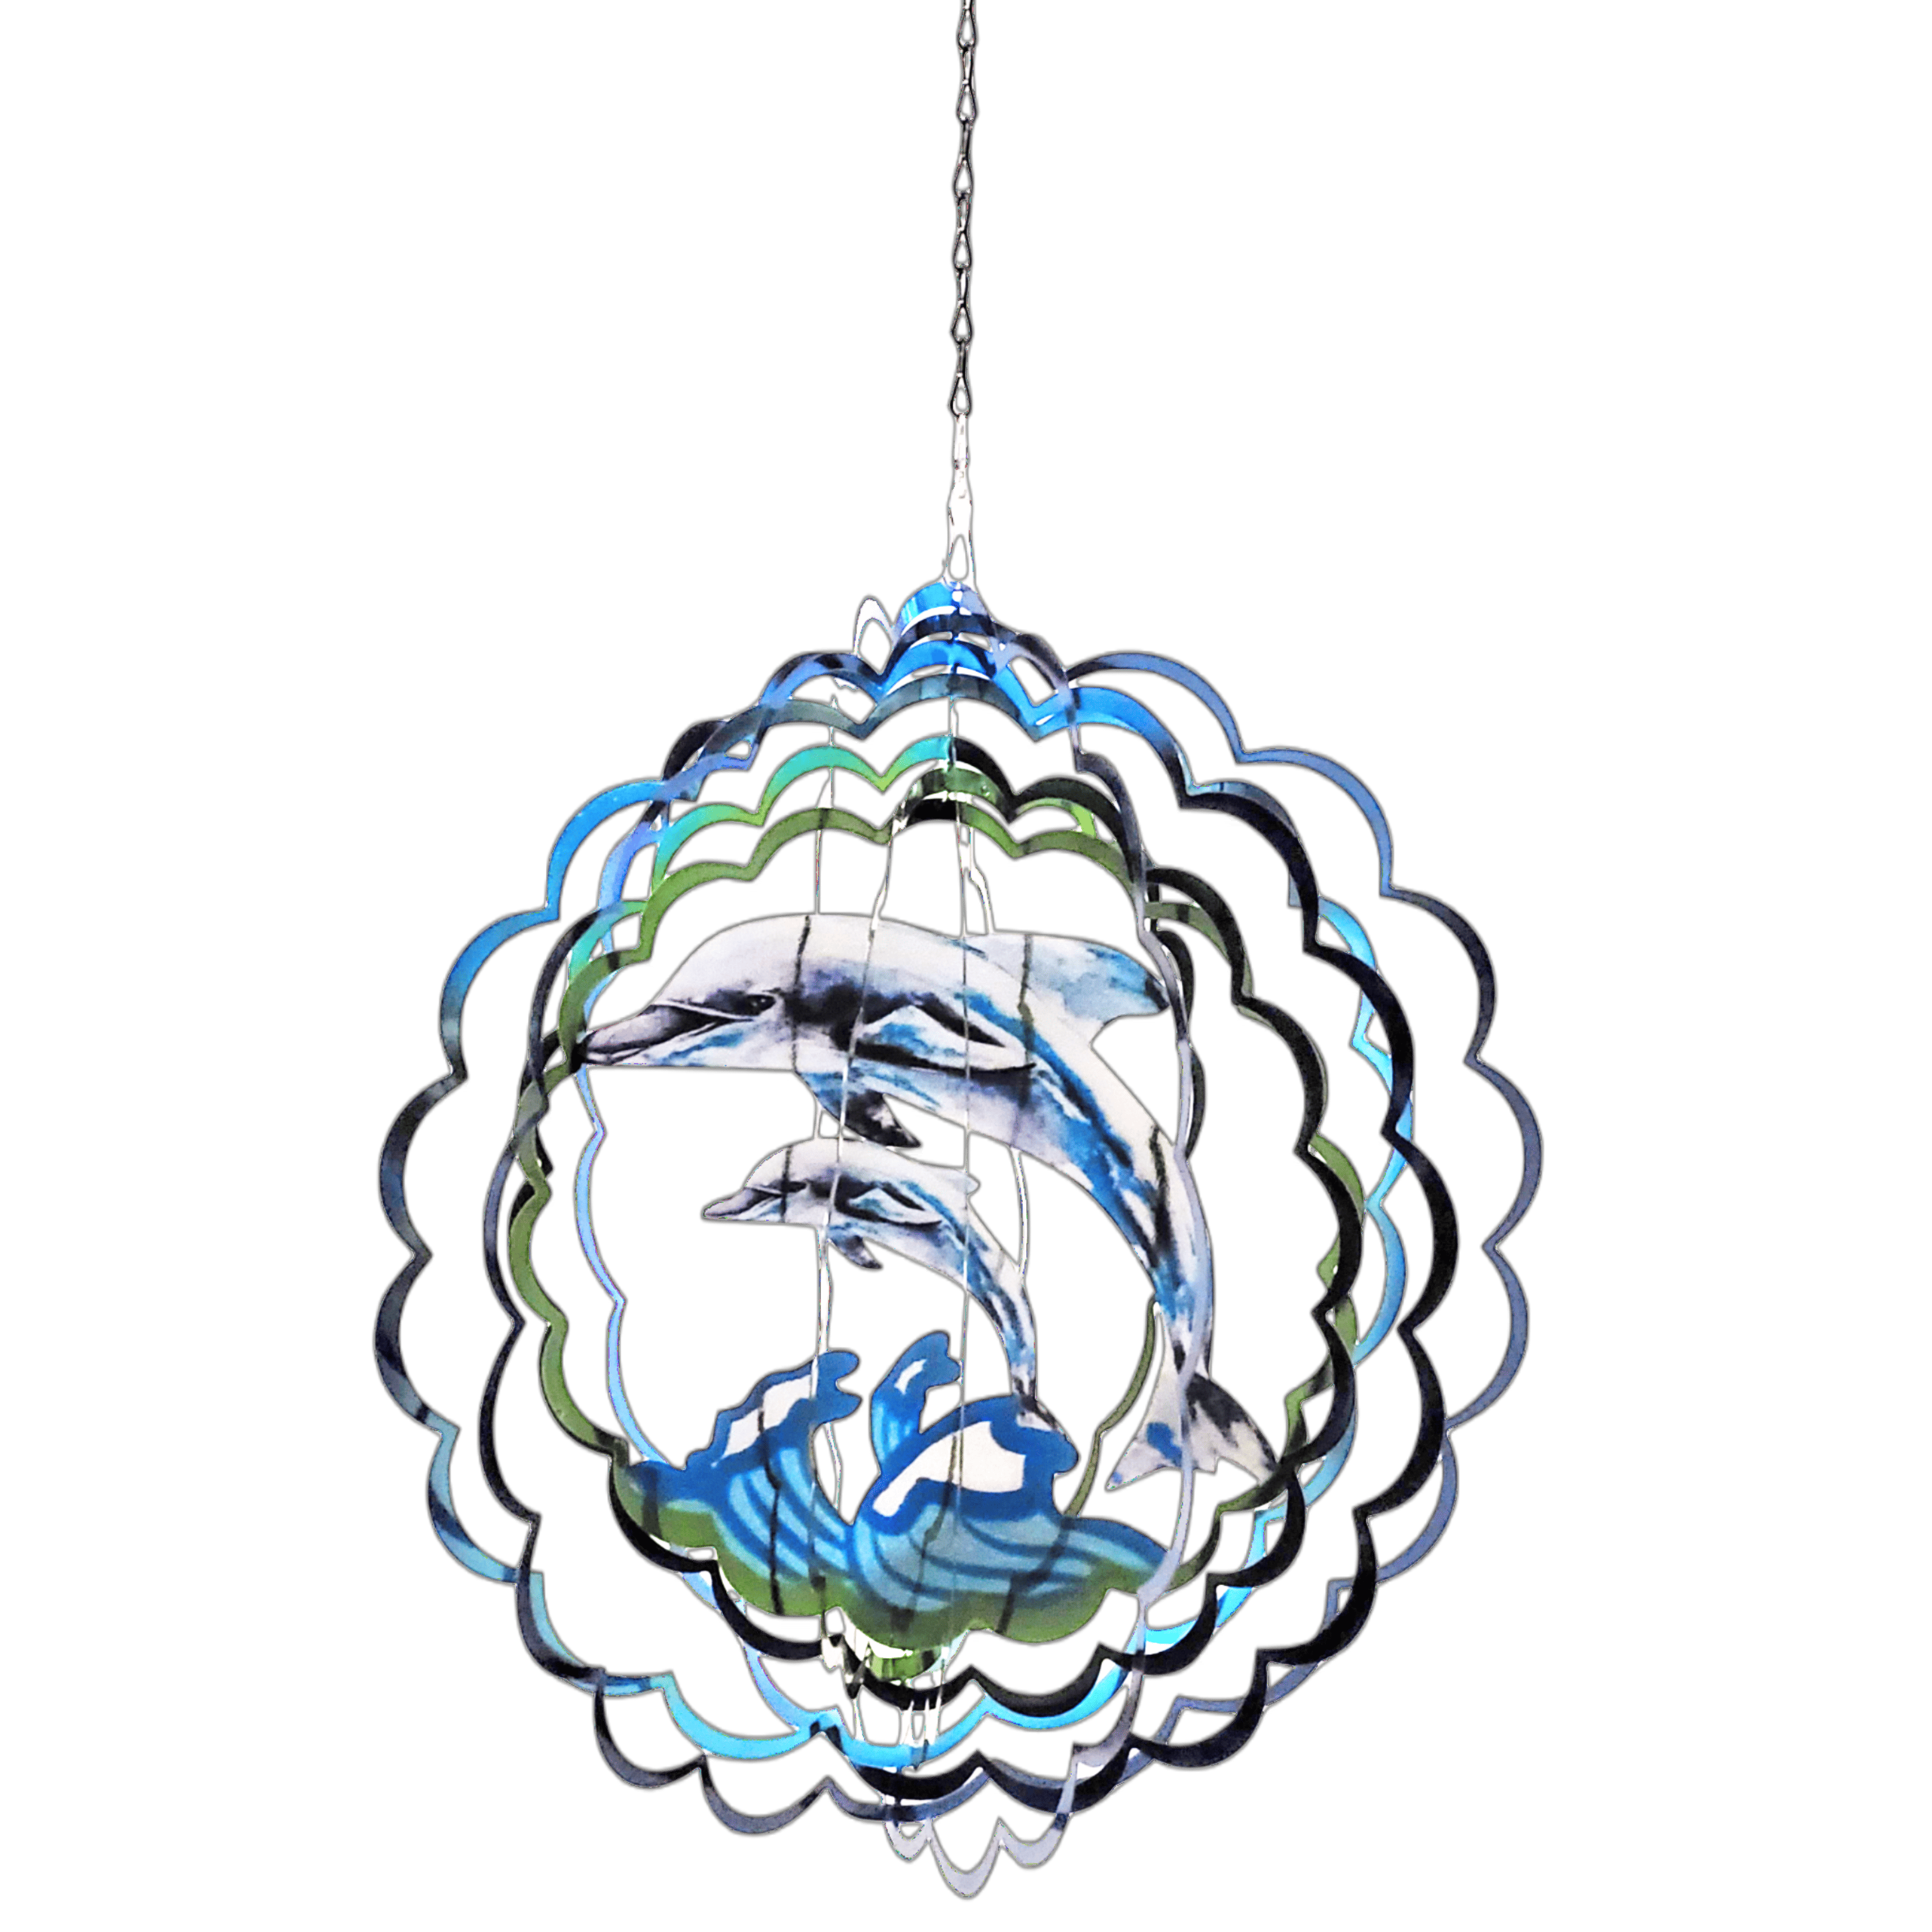 Colorful Dolphin Wind Spinner - Vibrant and Fun 3-D Metal Wind